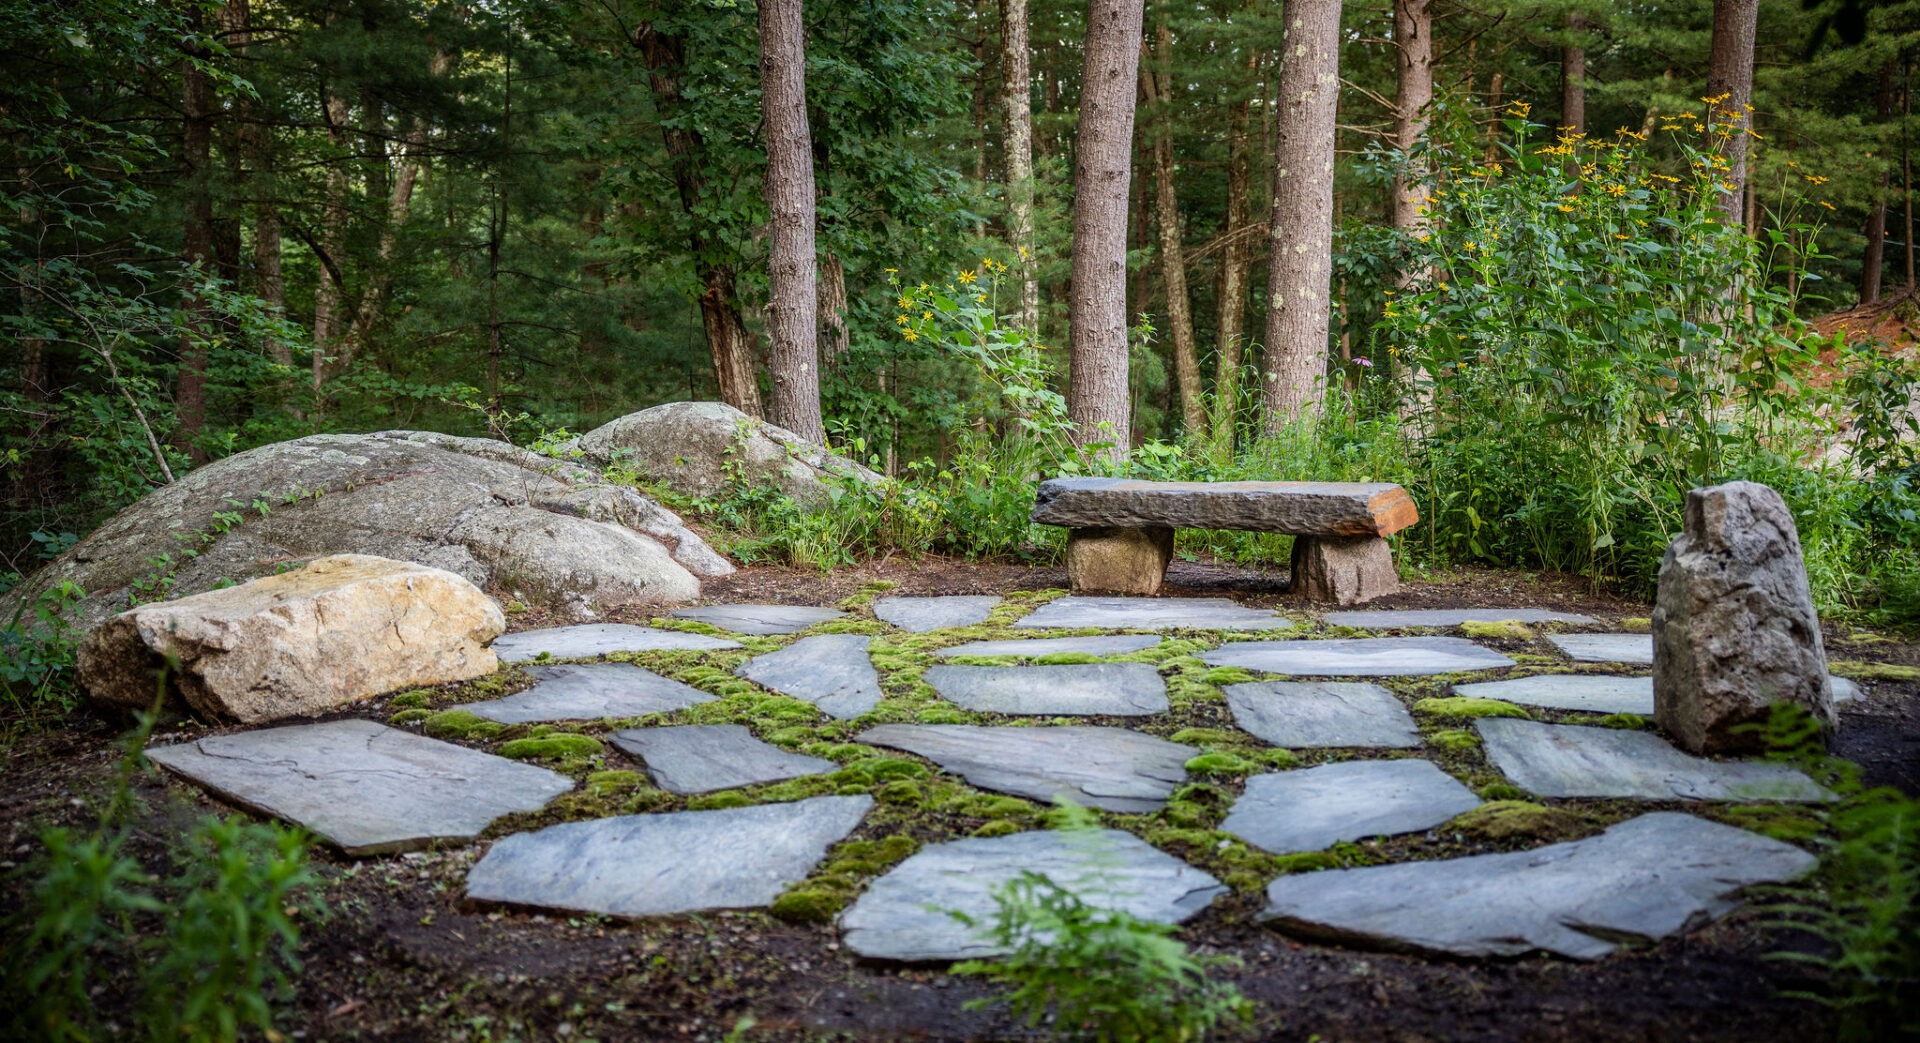 A serene forest setting with a rustic stone pathway leading to a simple wooden bench, surrounded by mature trees and lush greenery.